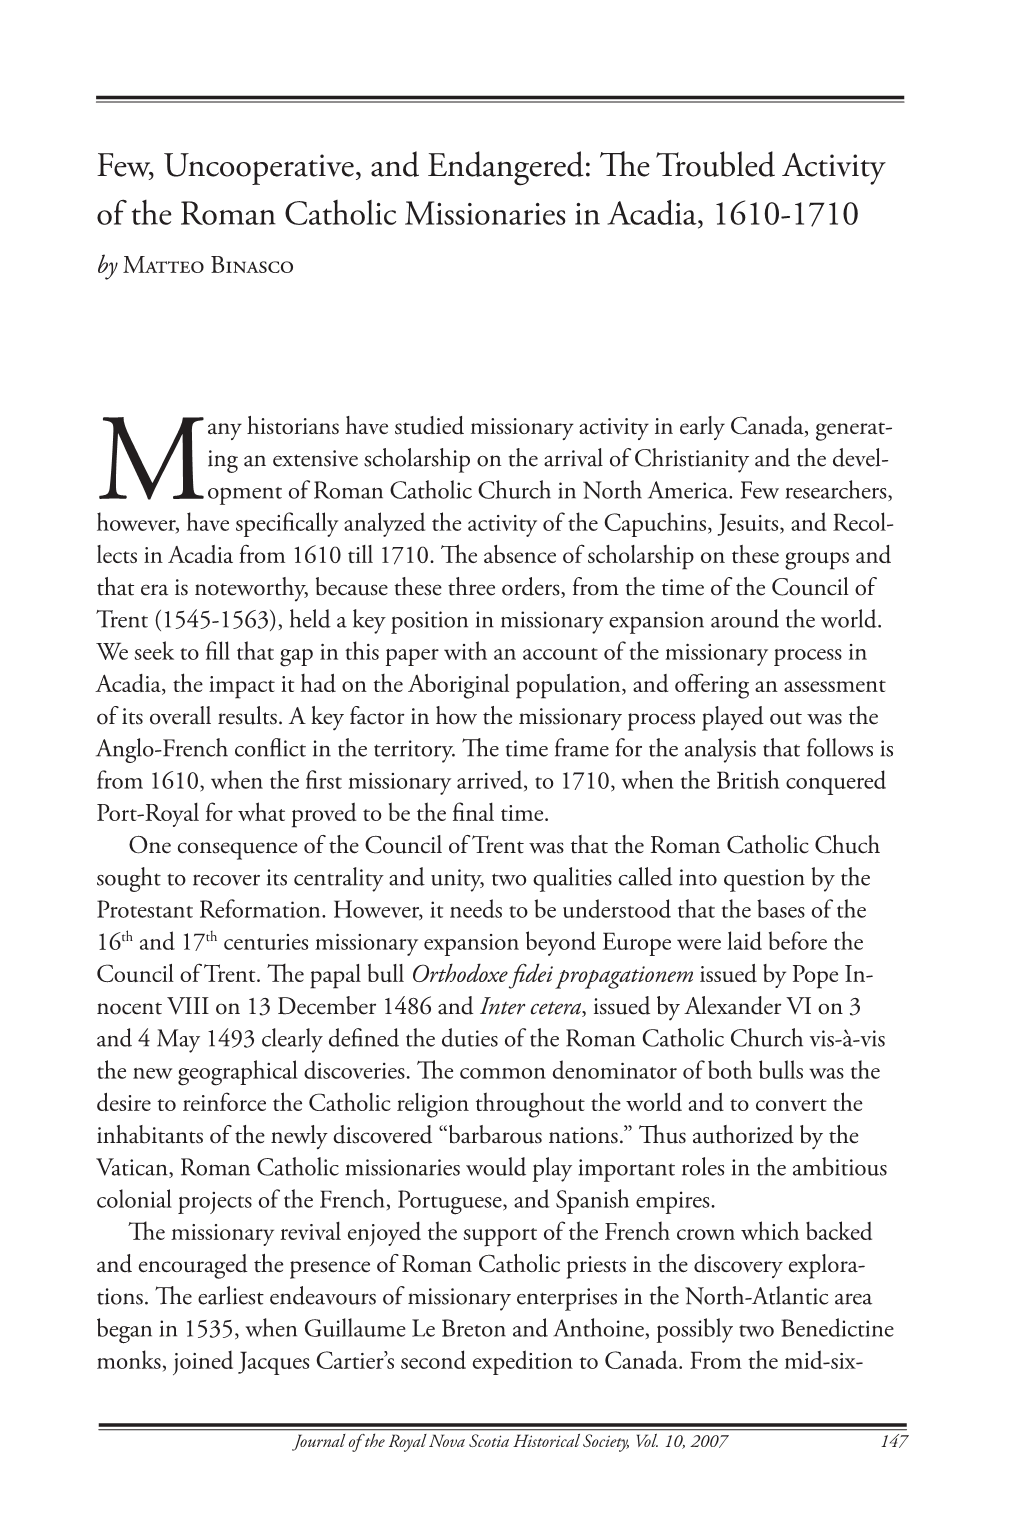 The Troubled Activity of the Roman Catholic Missionaries in Acadia, 1610-1710 by Matteo Binasco